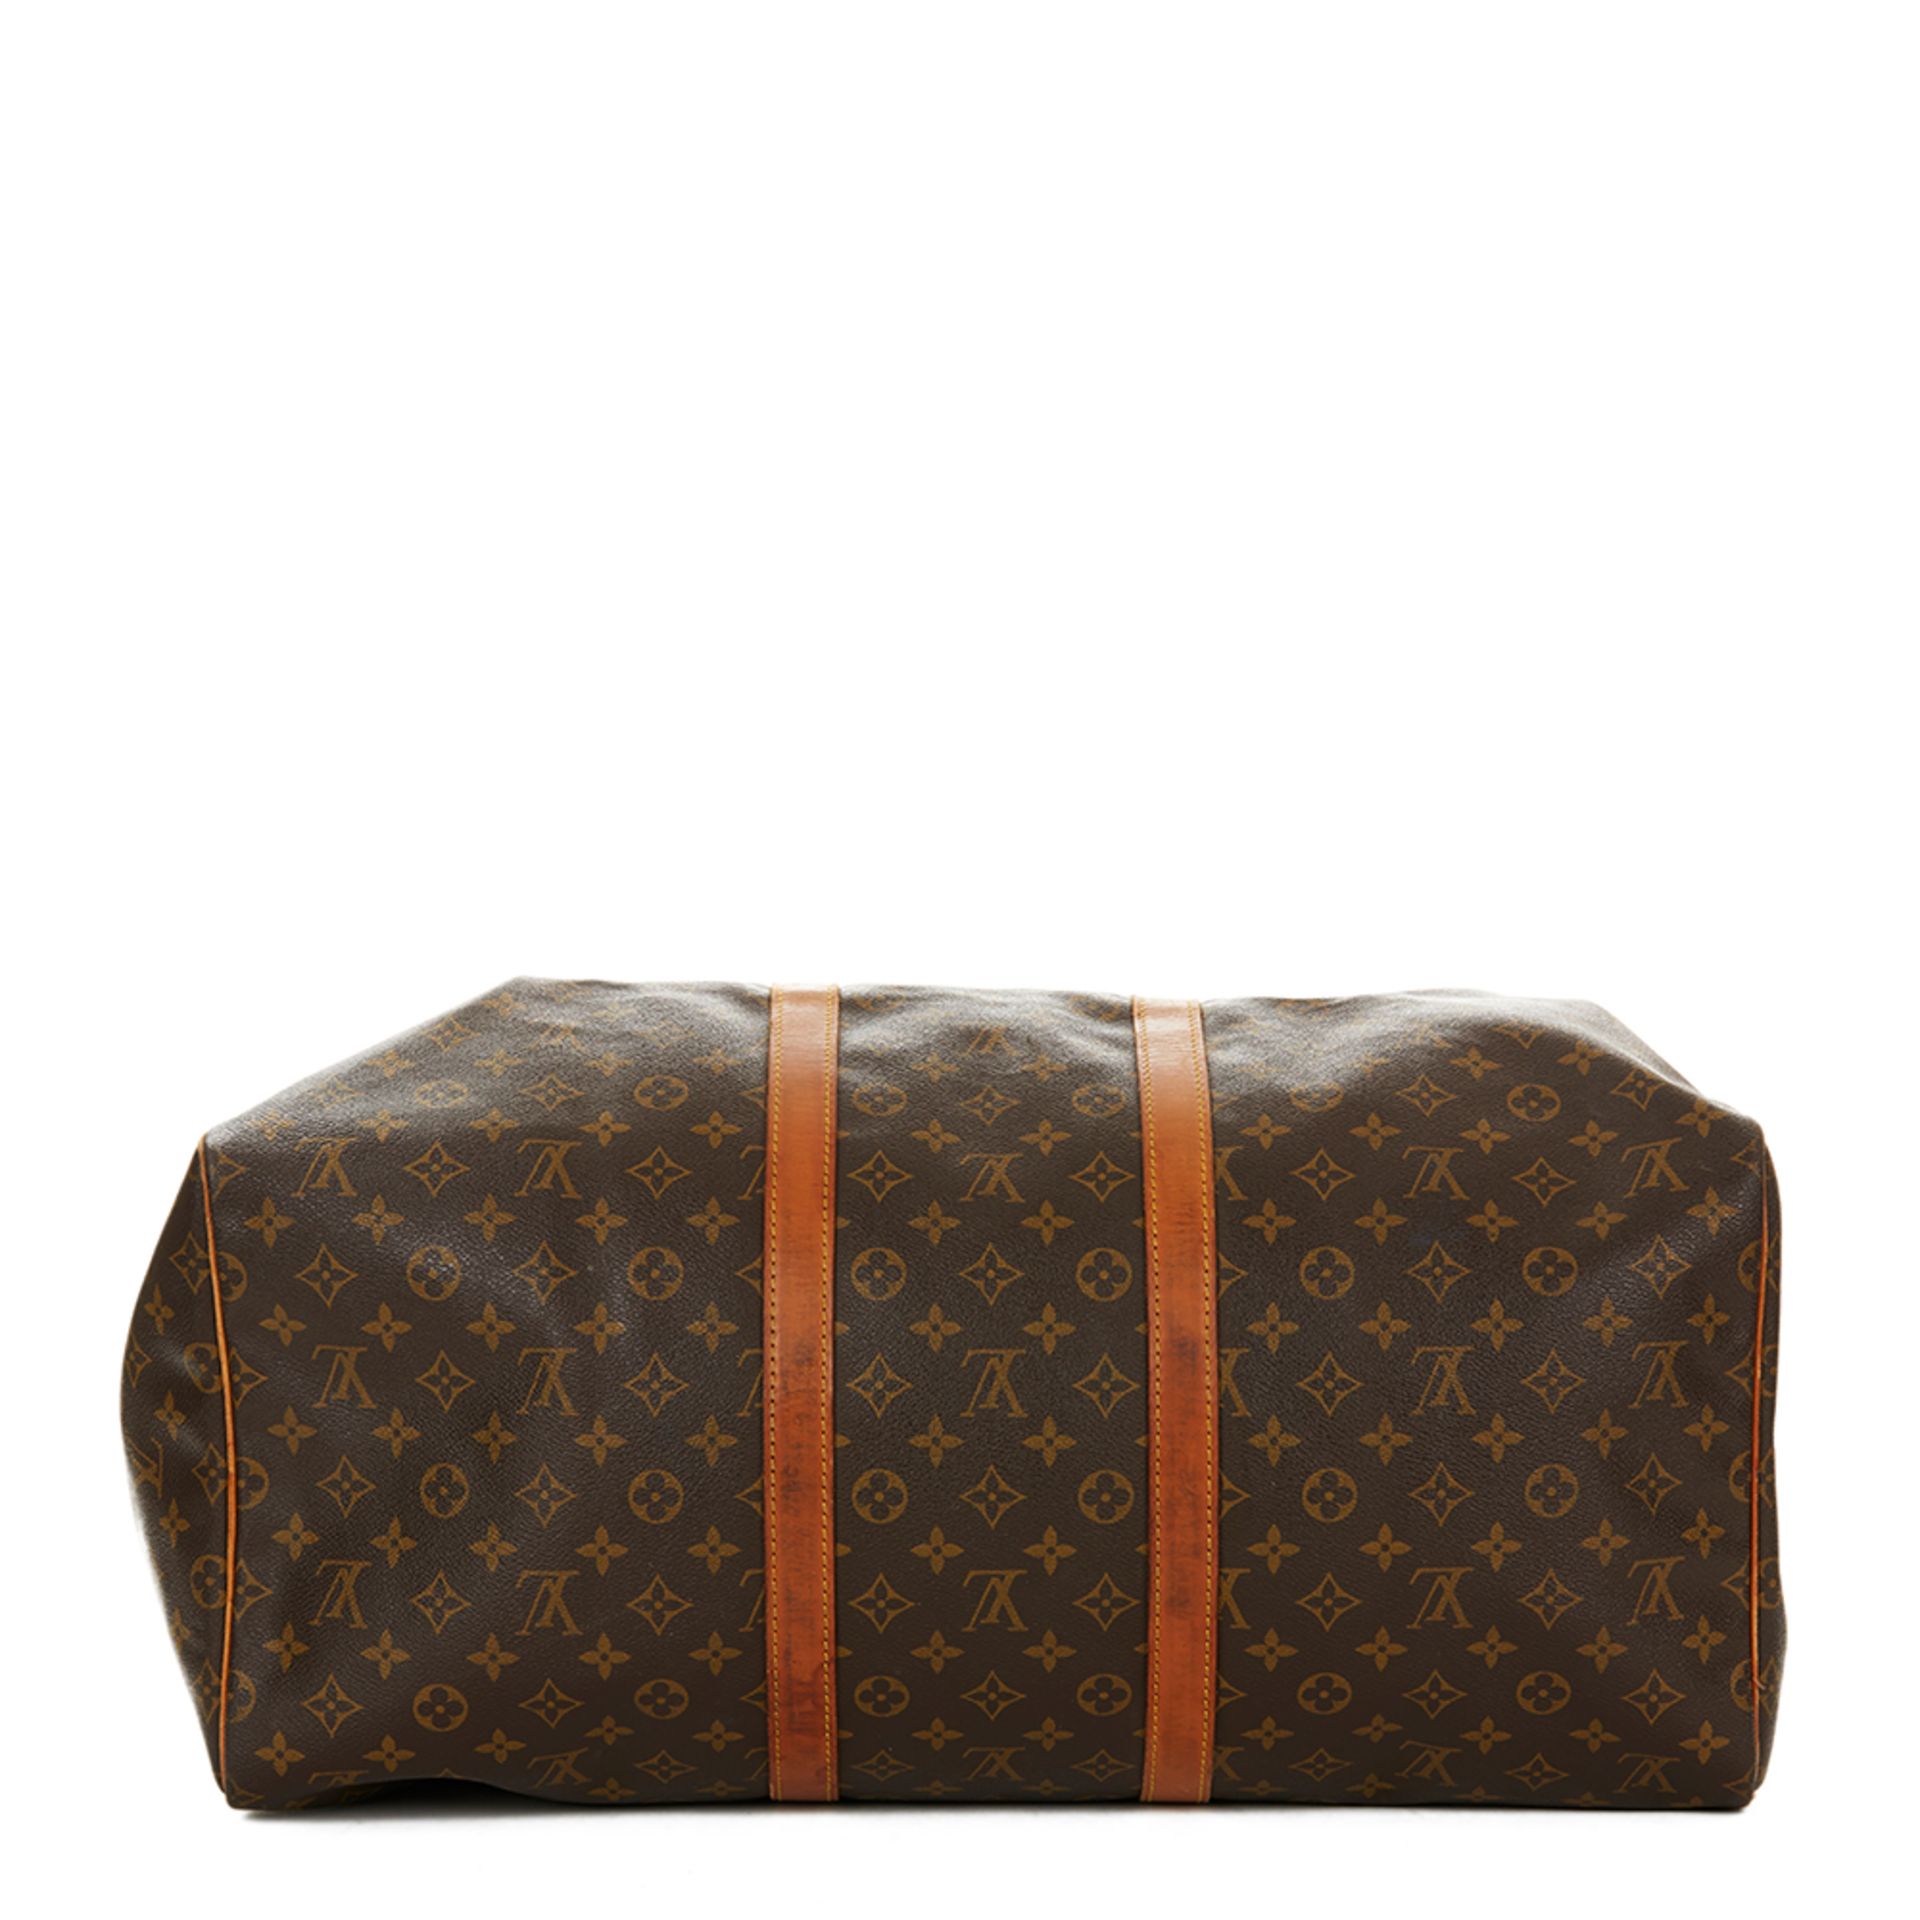 Louis Vuitton Keepall 55 - Image 8 of 12